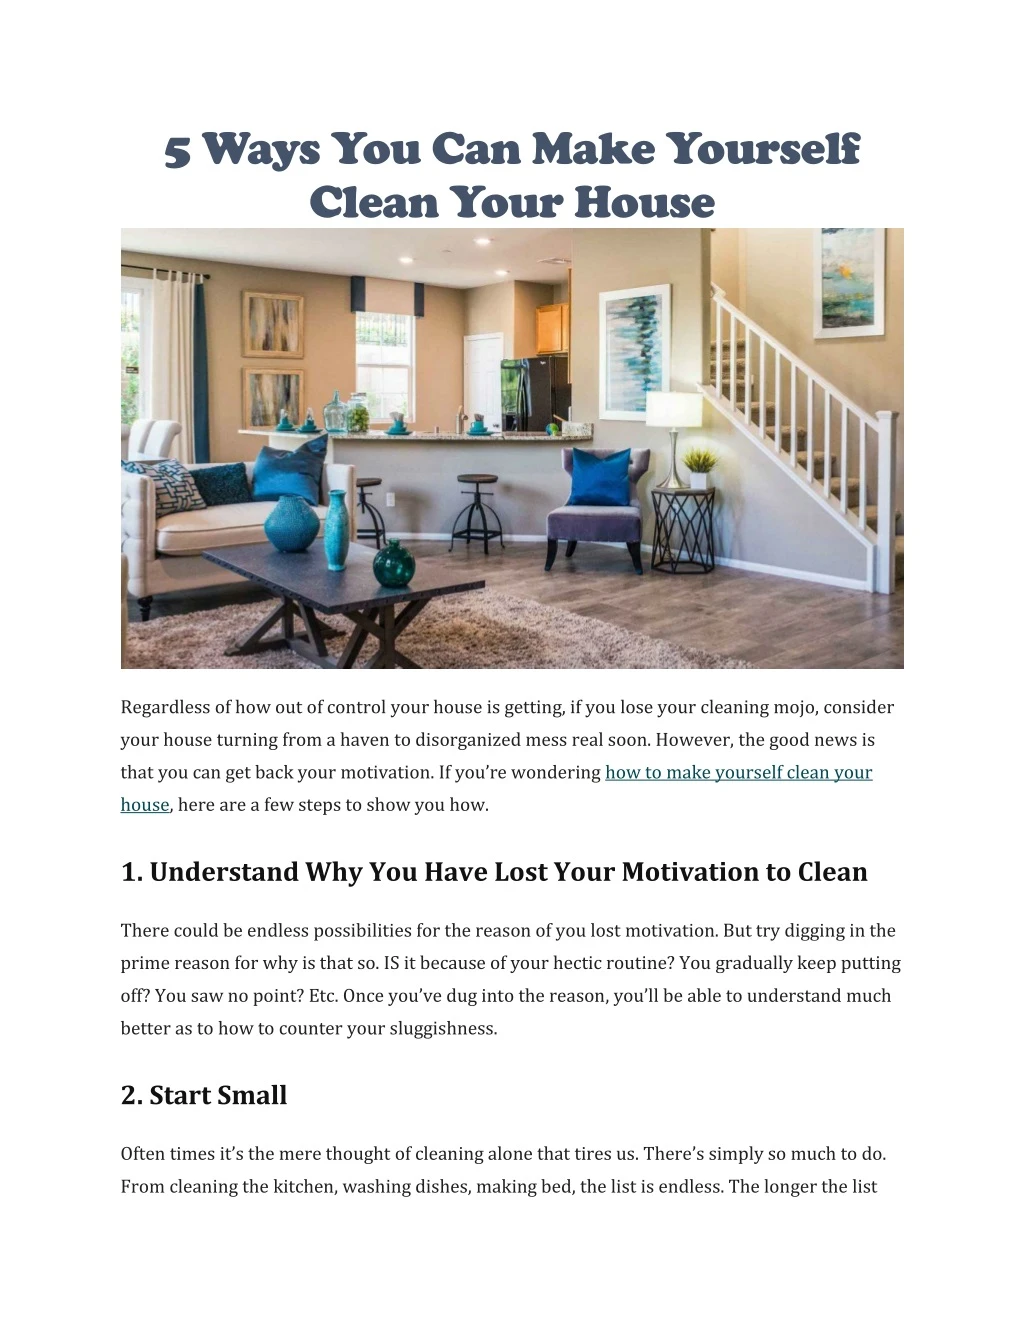 5 ways you can make yourself clean your house